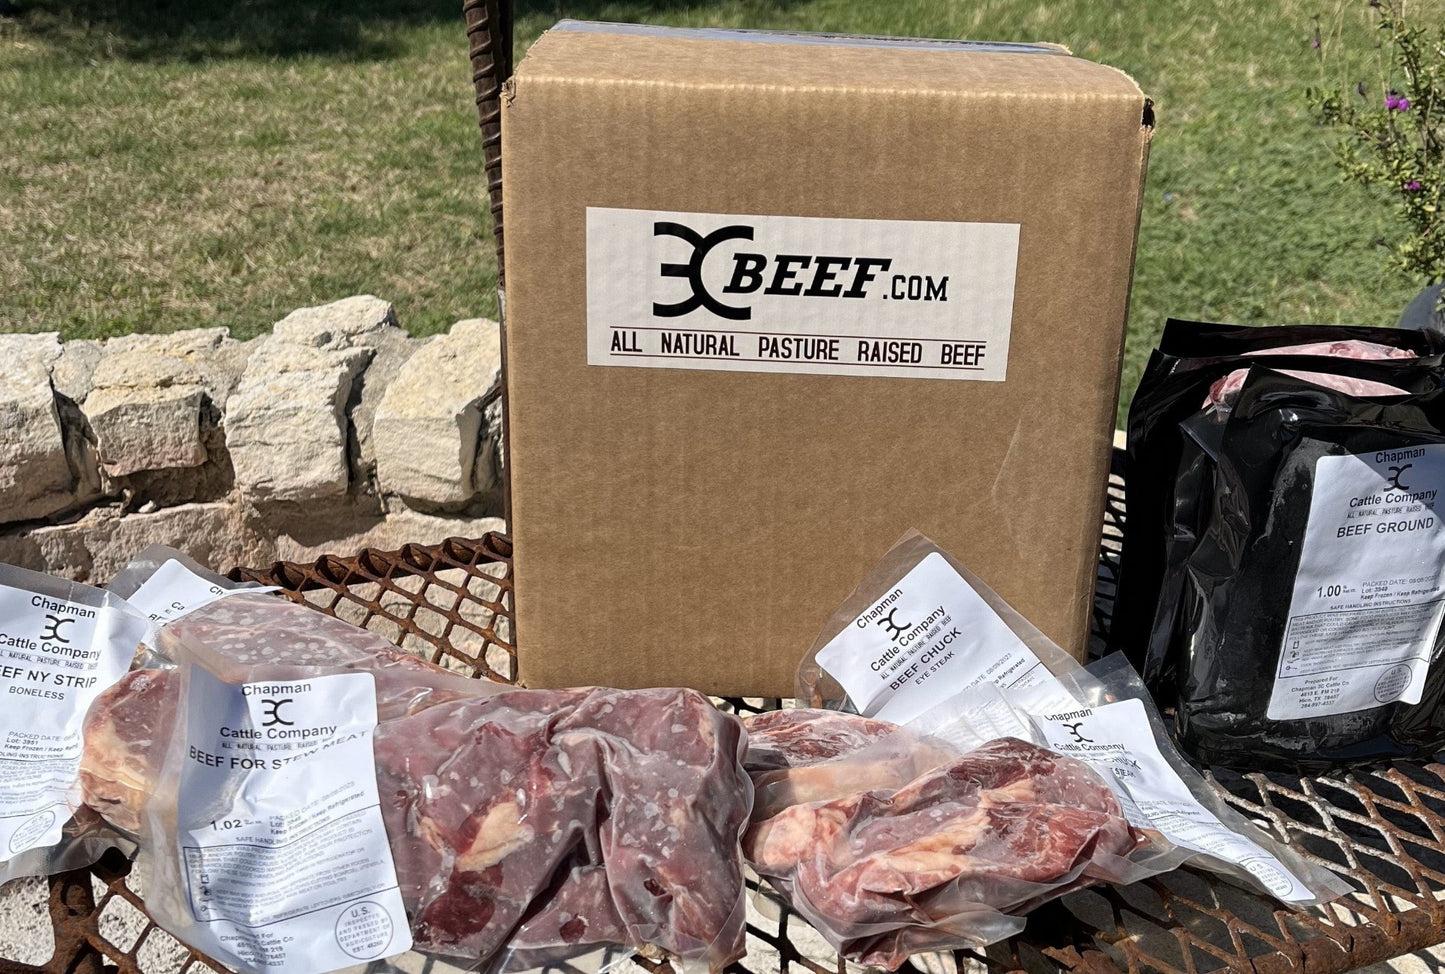 
                  
                    Chapman 3C Cattle Company Beef Subscription 8lbs. Box Beef Subscription Beef Box Subscription
                  
                